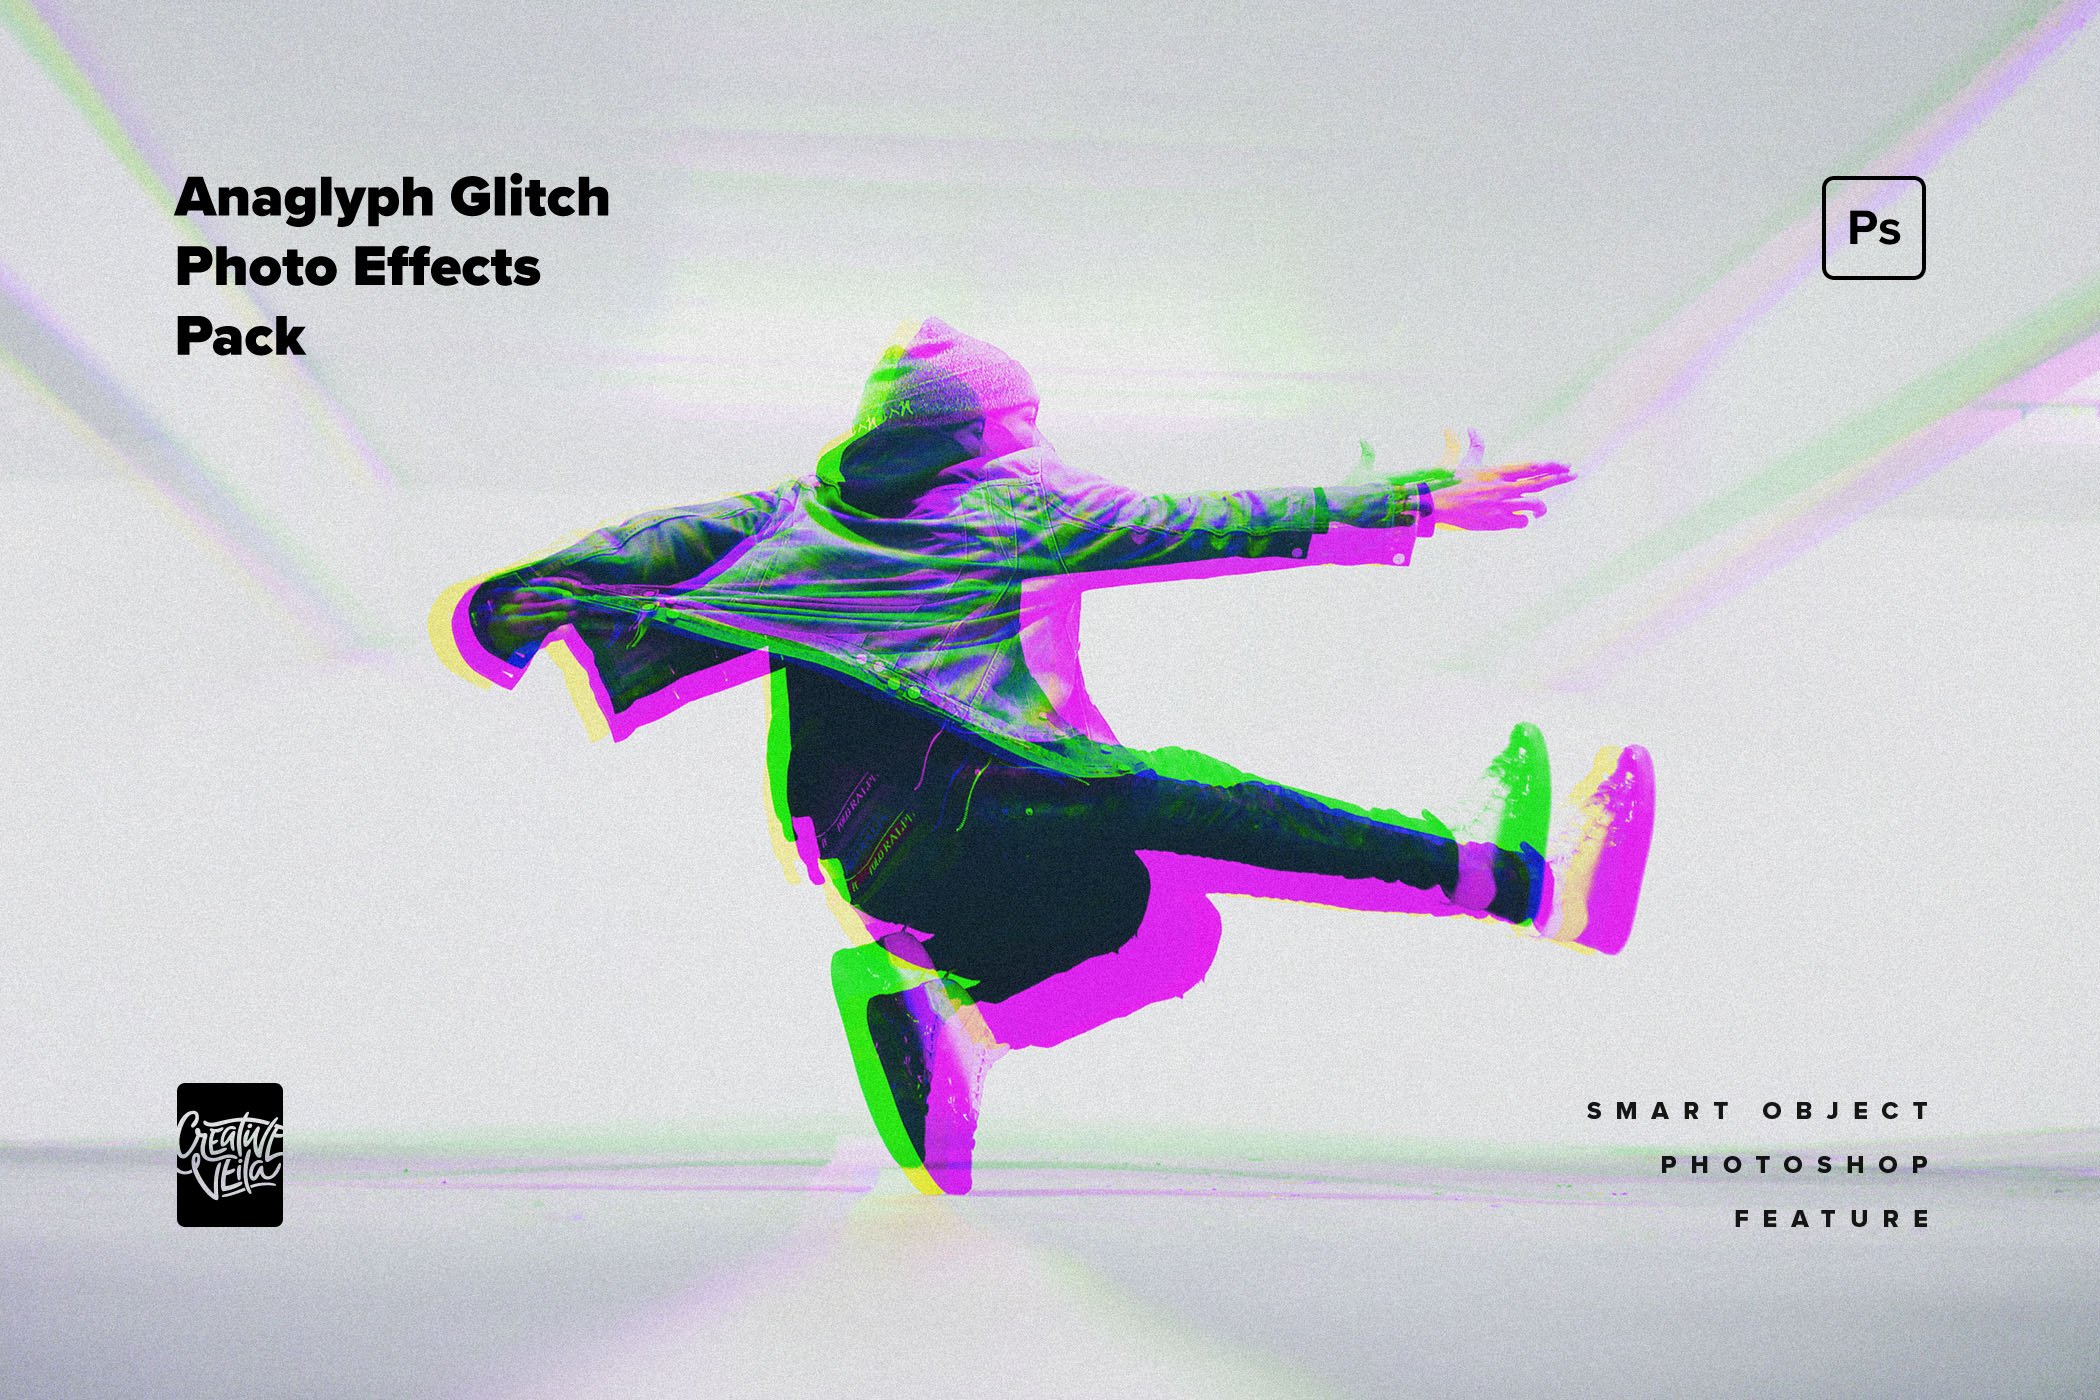 anaglyph glitch photo effects pack by creative veila 03 818